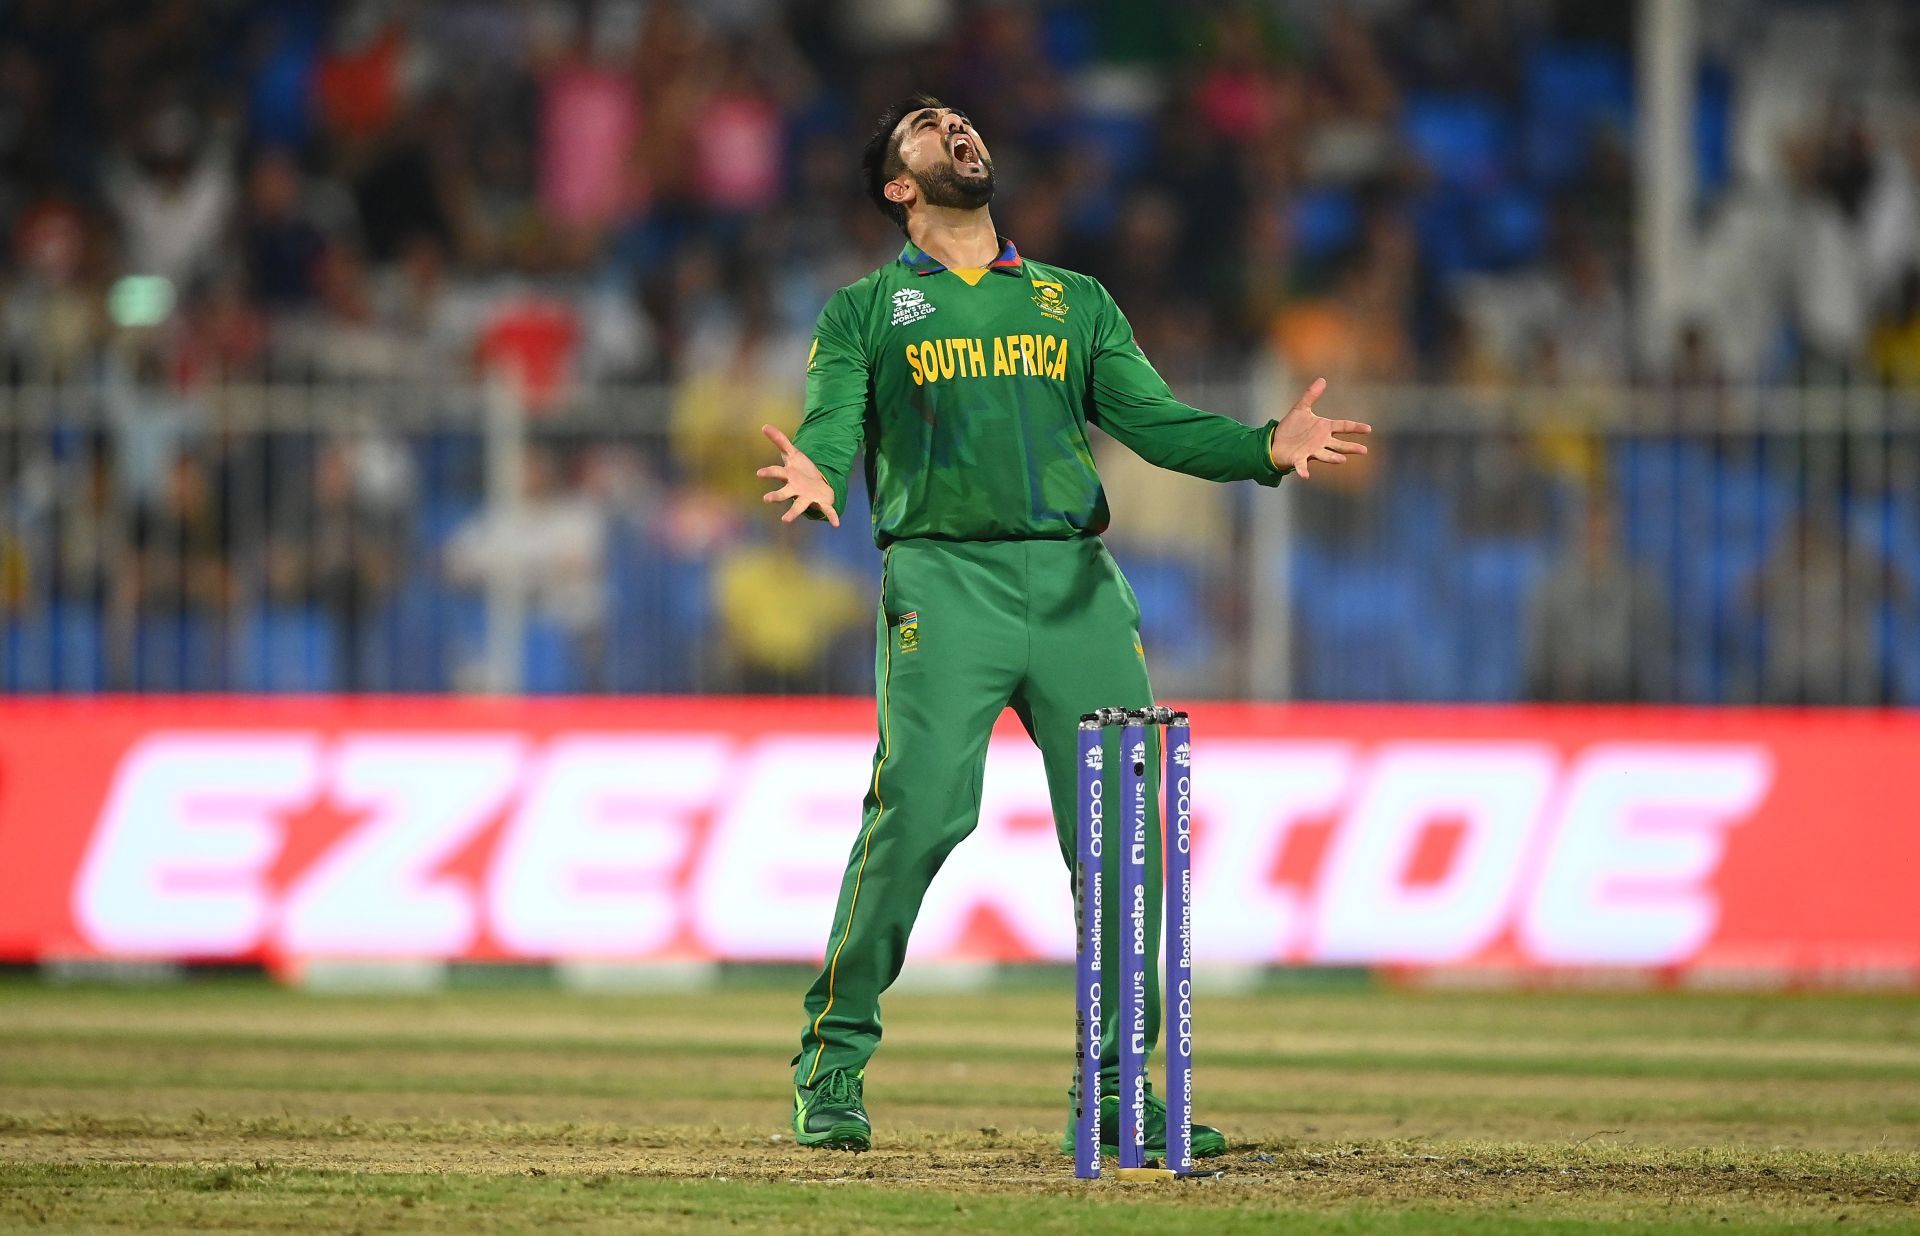 Tabraiz Shamsi was impressive with the ball at the T20 World Cup 2021.